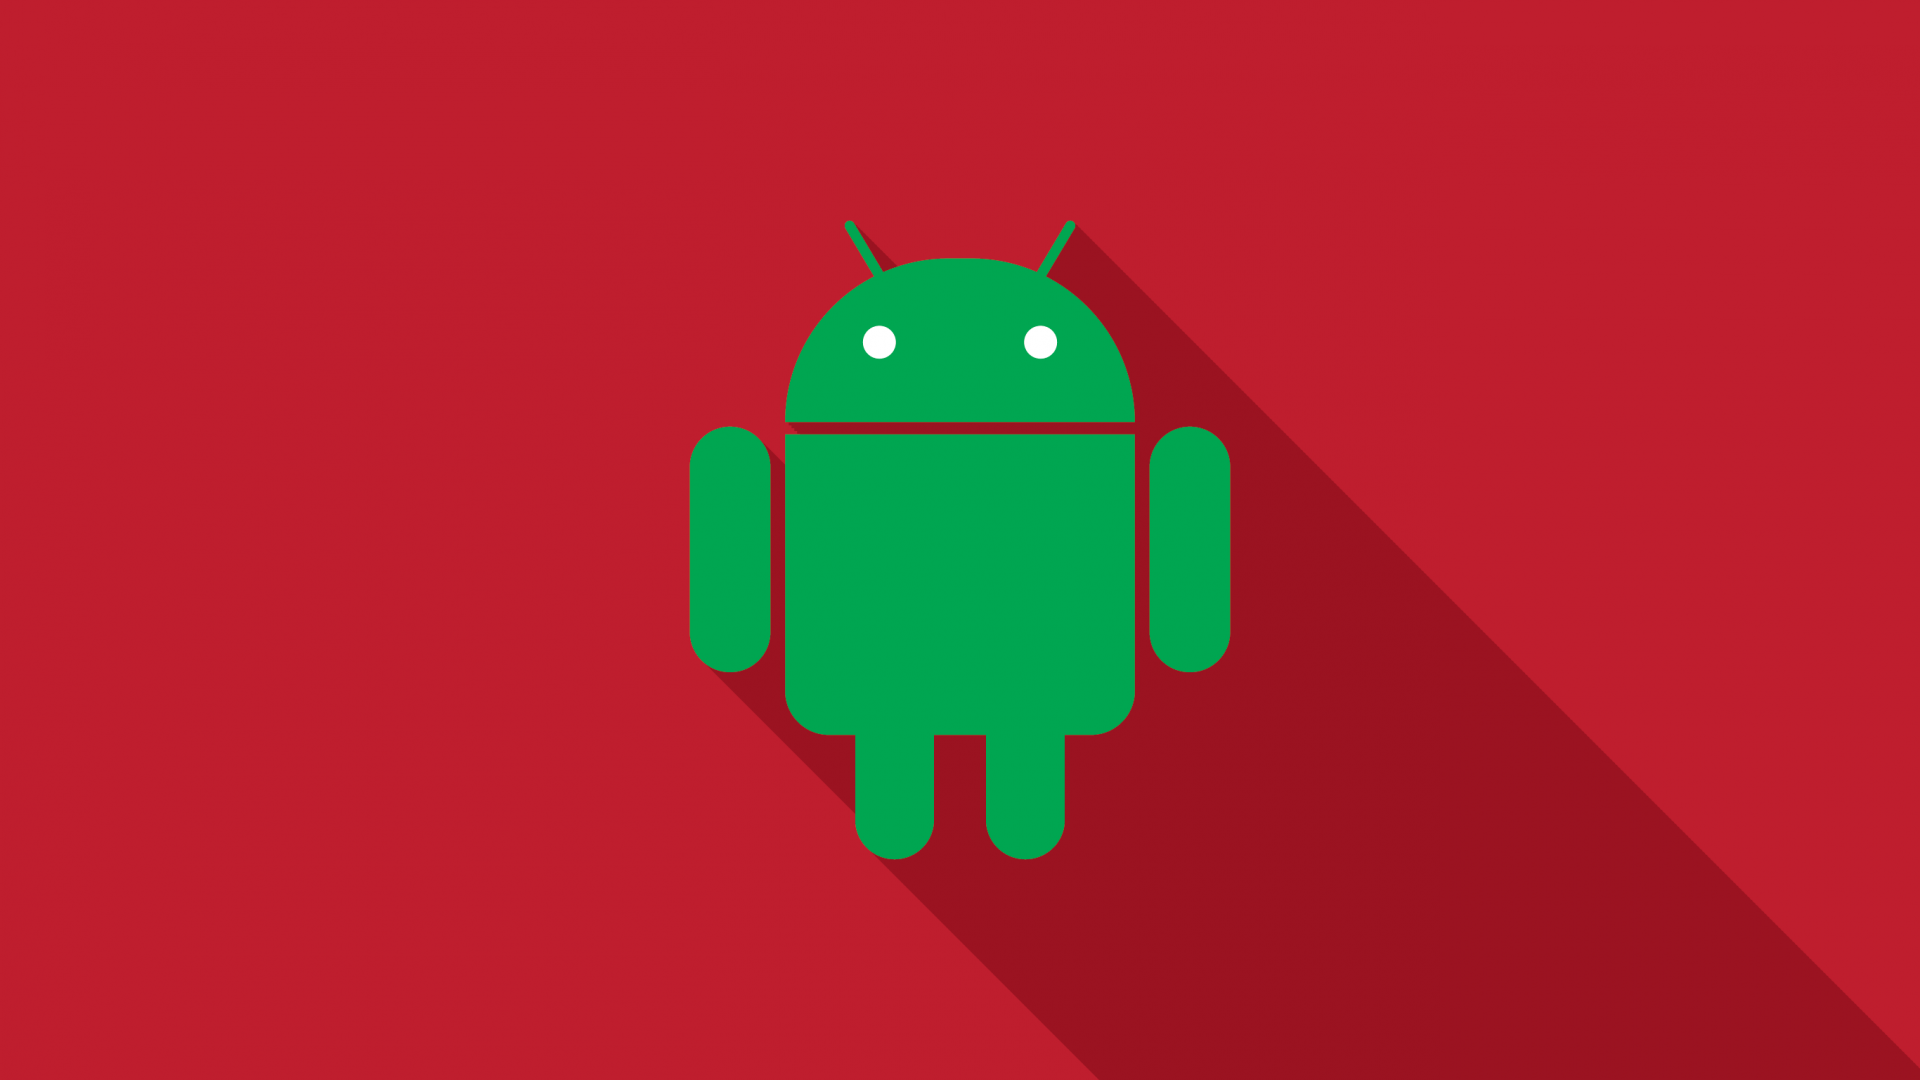 Wallpaper Android logo minimal in red background